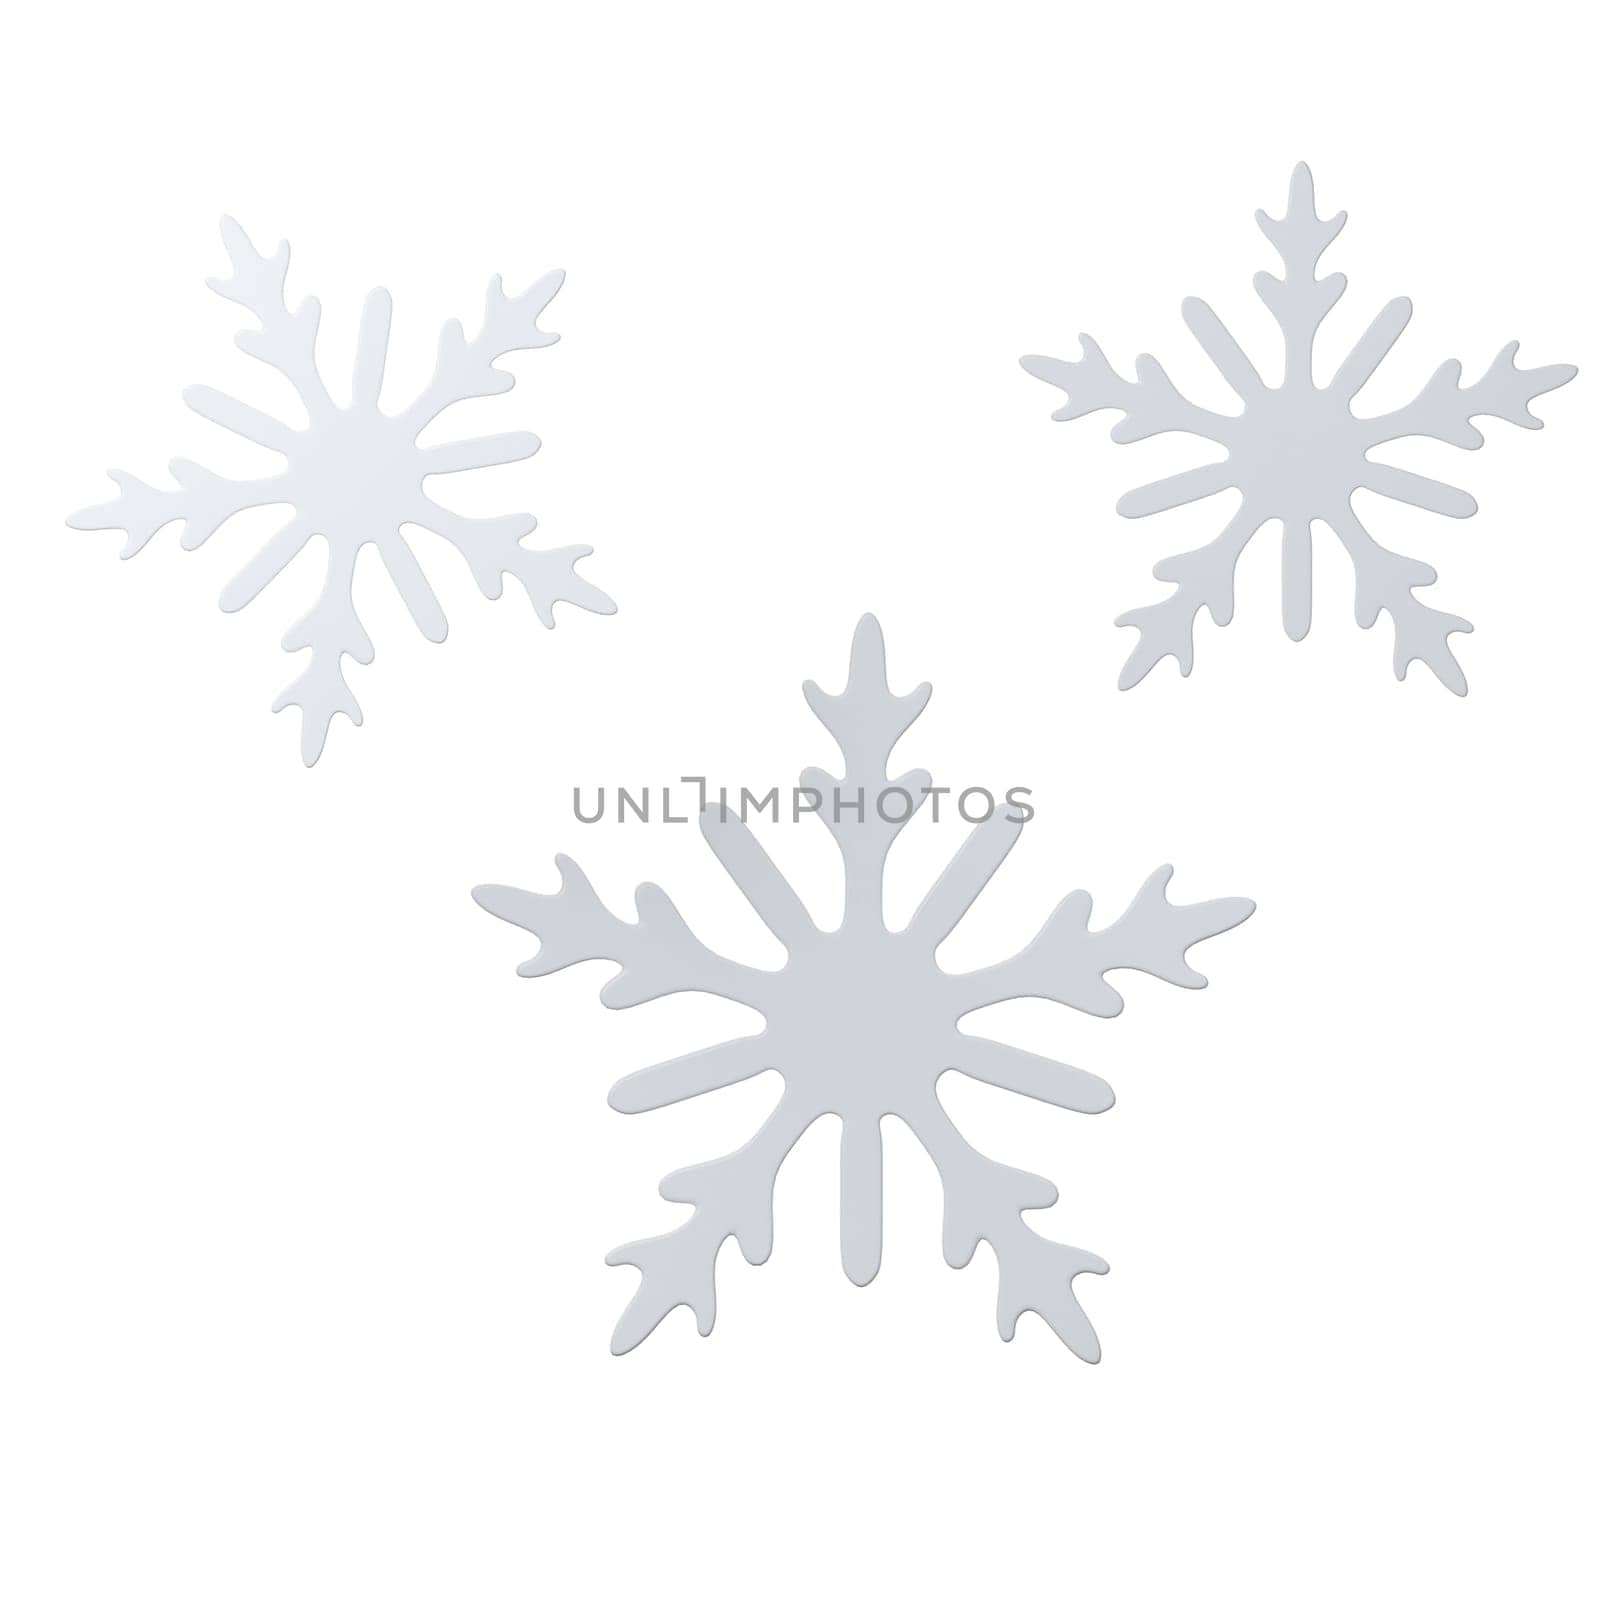 3d Christmas snowflake icon. minimal decorative festive conical shape tree. New Year's holiday decor. 3d design element In cartoon style. Icon isolated on white background. 3d illustration by meepiangraphic